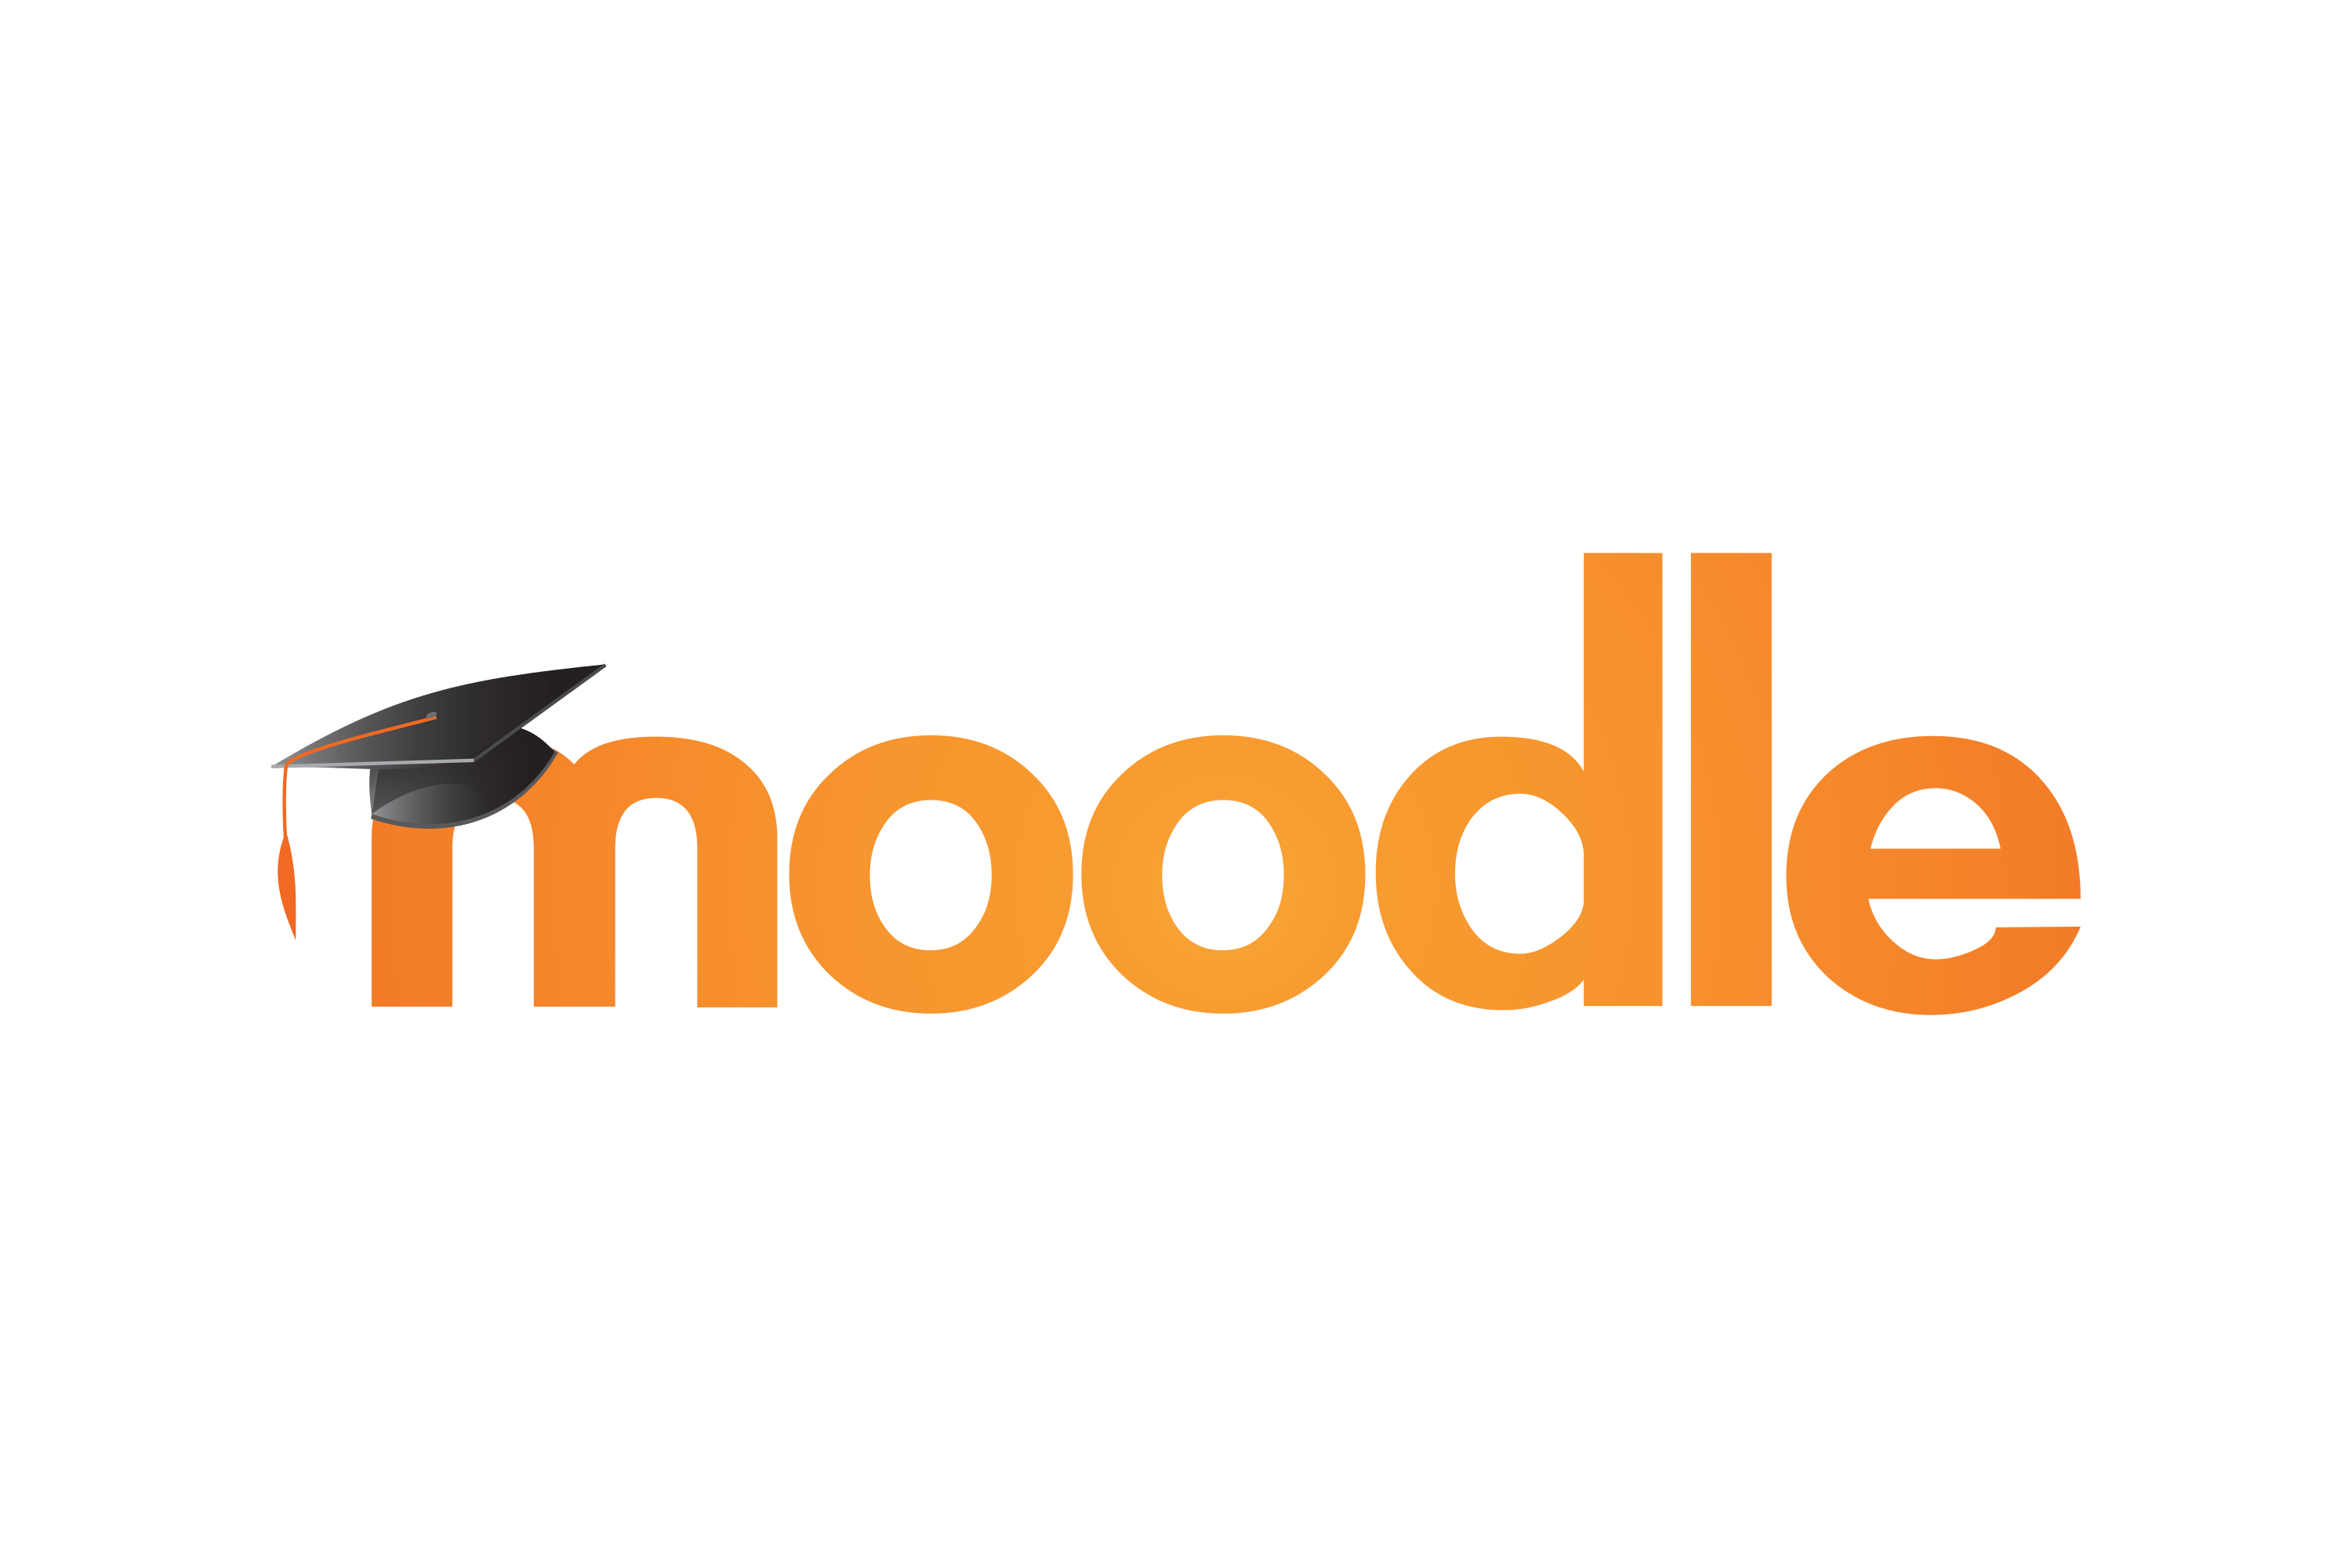 001_MOOD - DEMO MOODLE COURSE (HOW TO USE MOODLE)